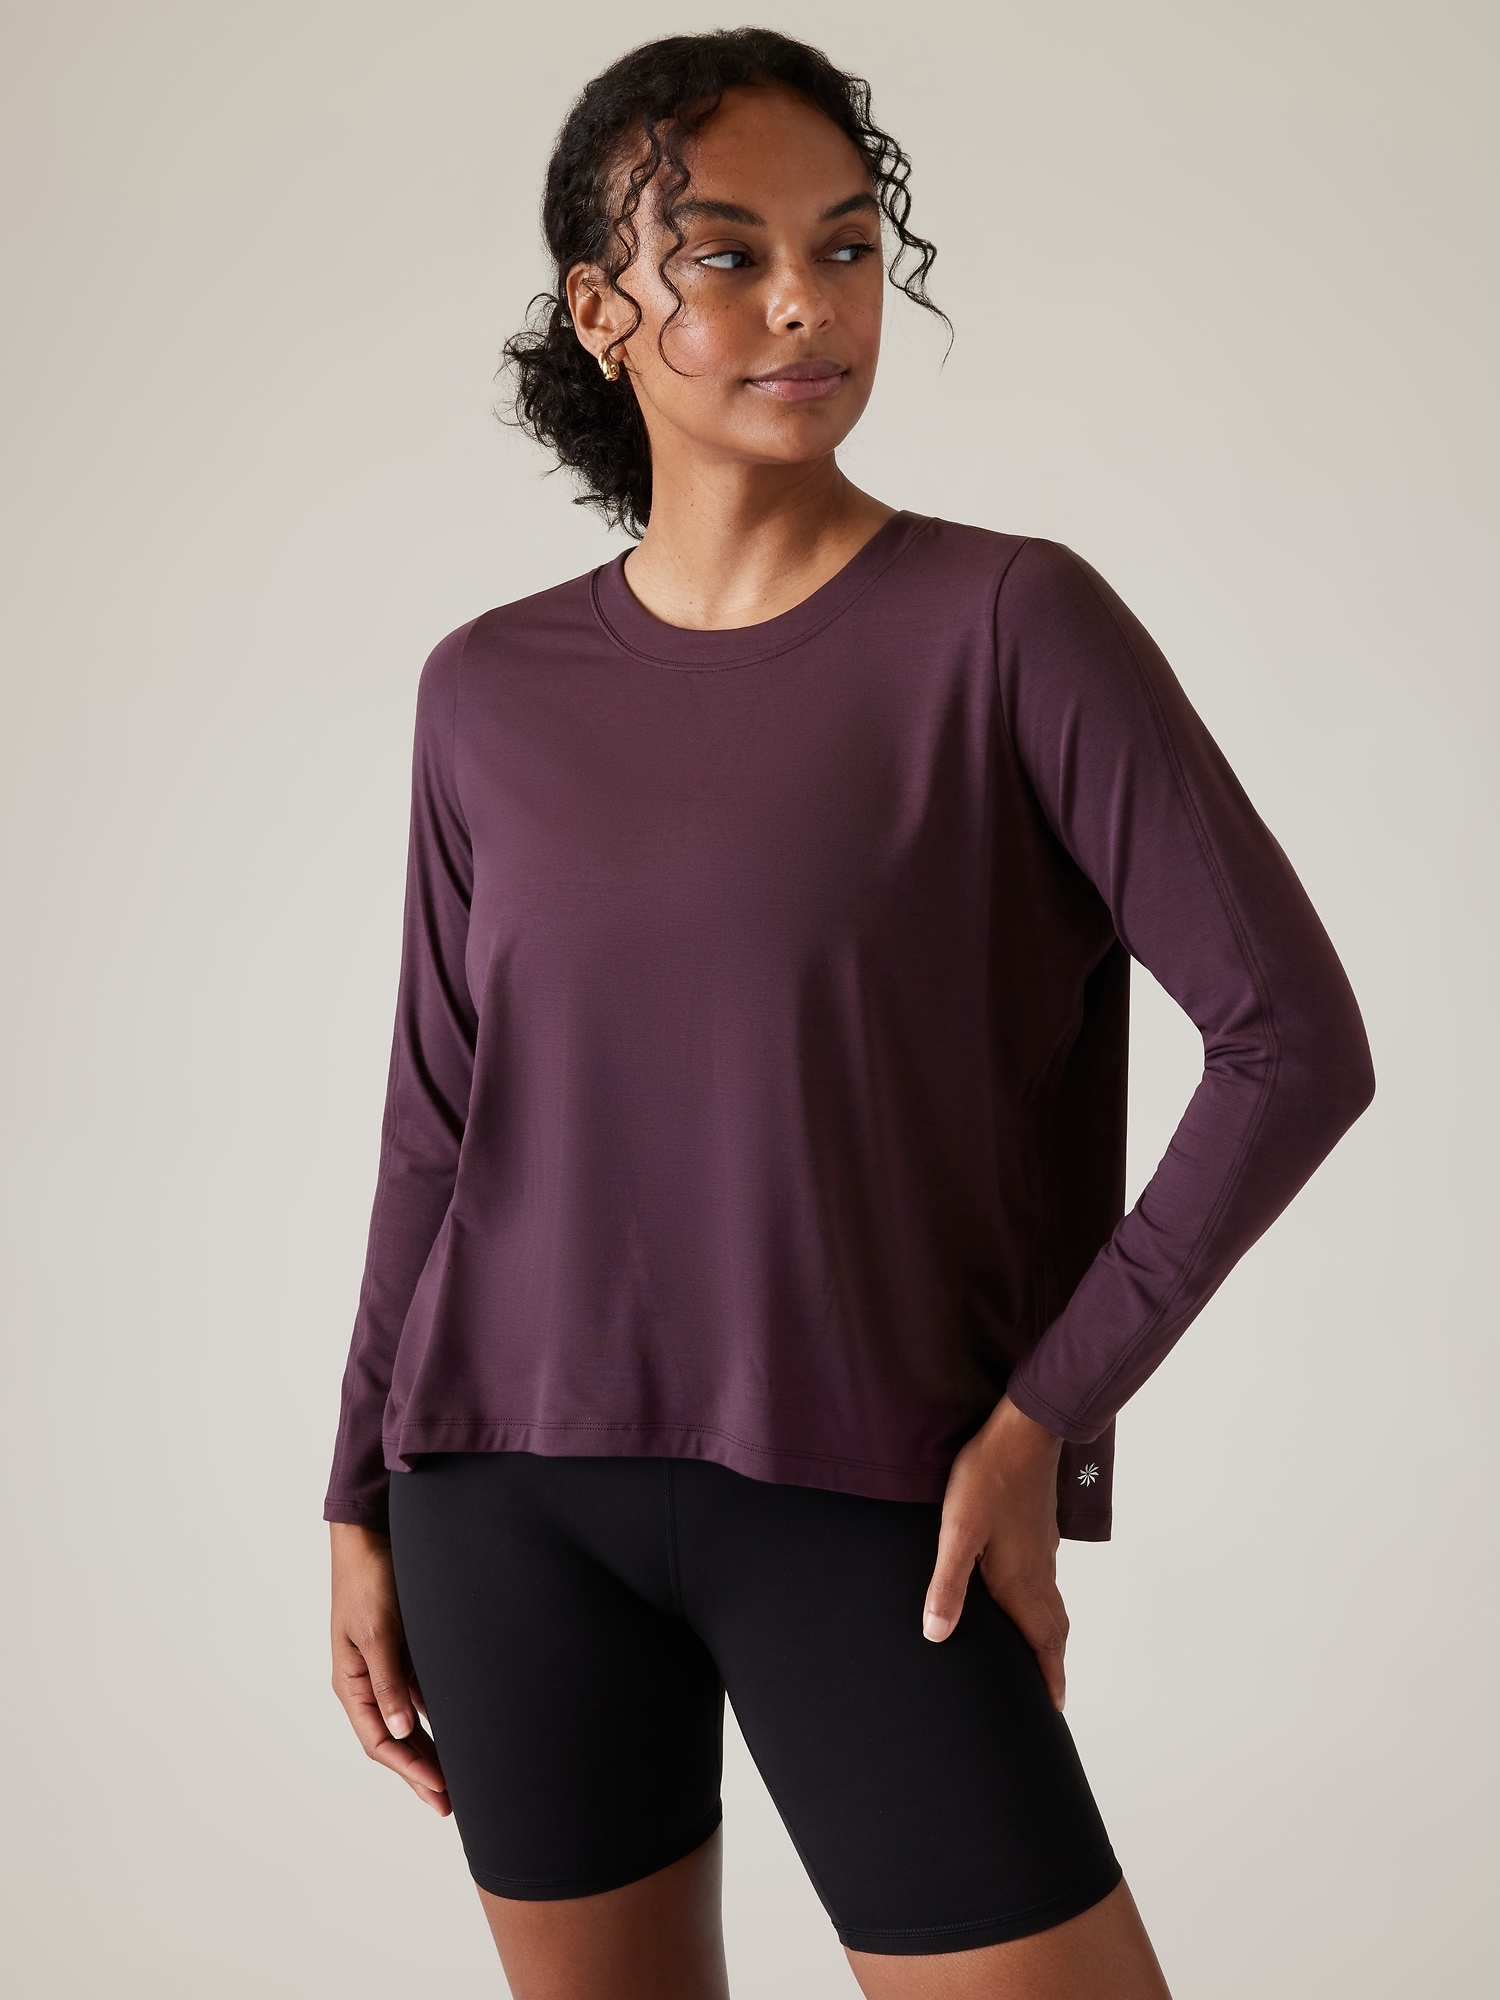 Athleta With Ease Top In Spiced Cabernet